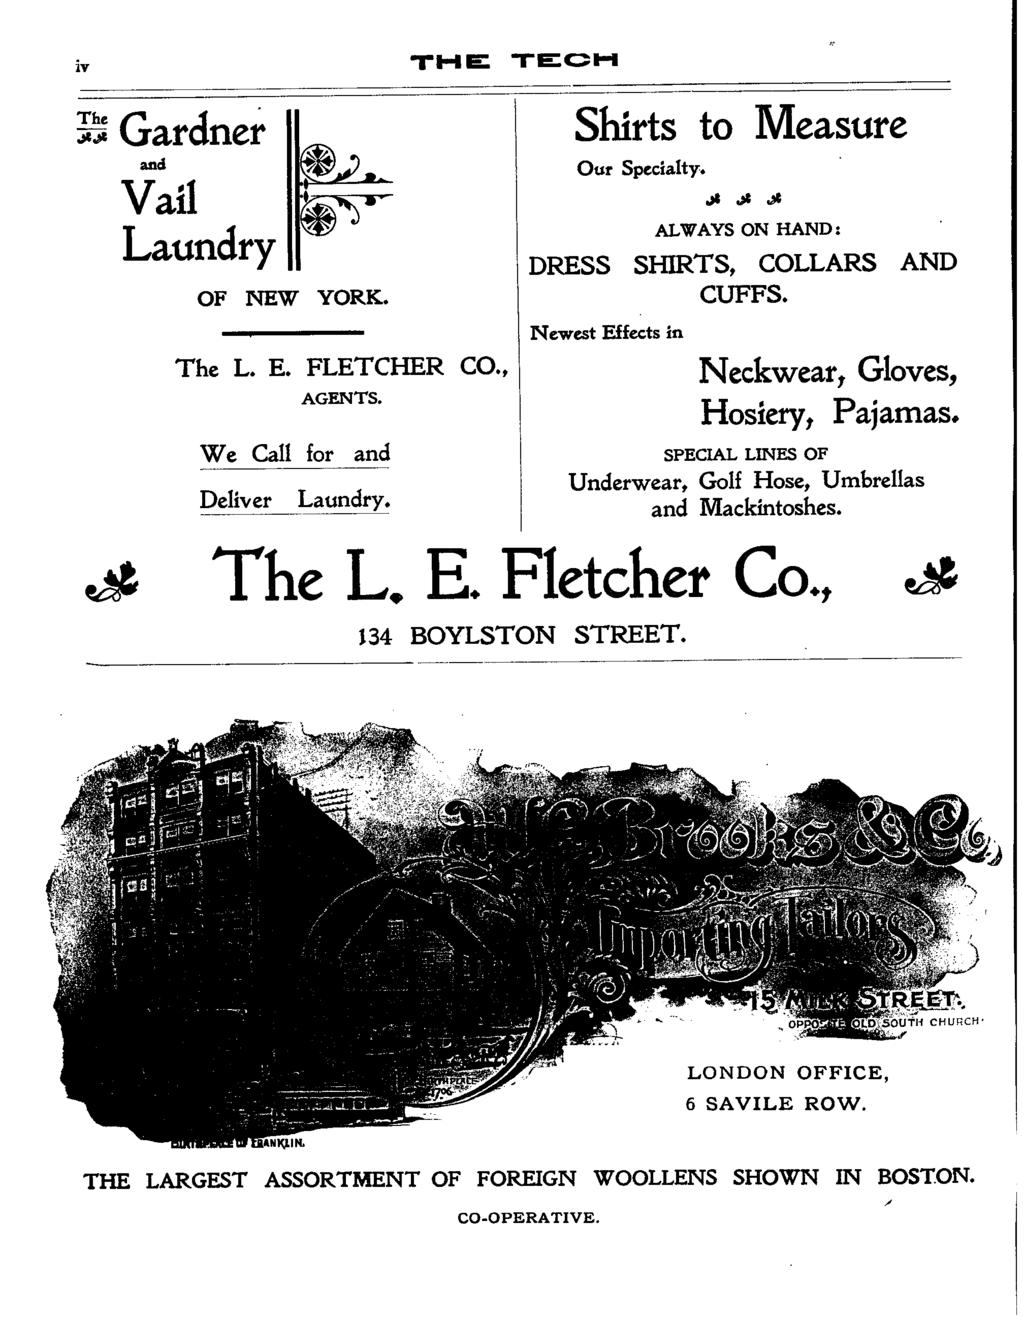 v l- r l The _0. Gardner and Val Laundry OF NEW YORK. The L. E. FLETCHER CO., AGENTS. We Call for and Delver [ [ tvs Laundry. a _ -- %- Shrts to Measure Our Specalty.